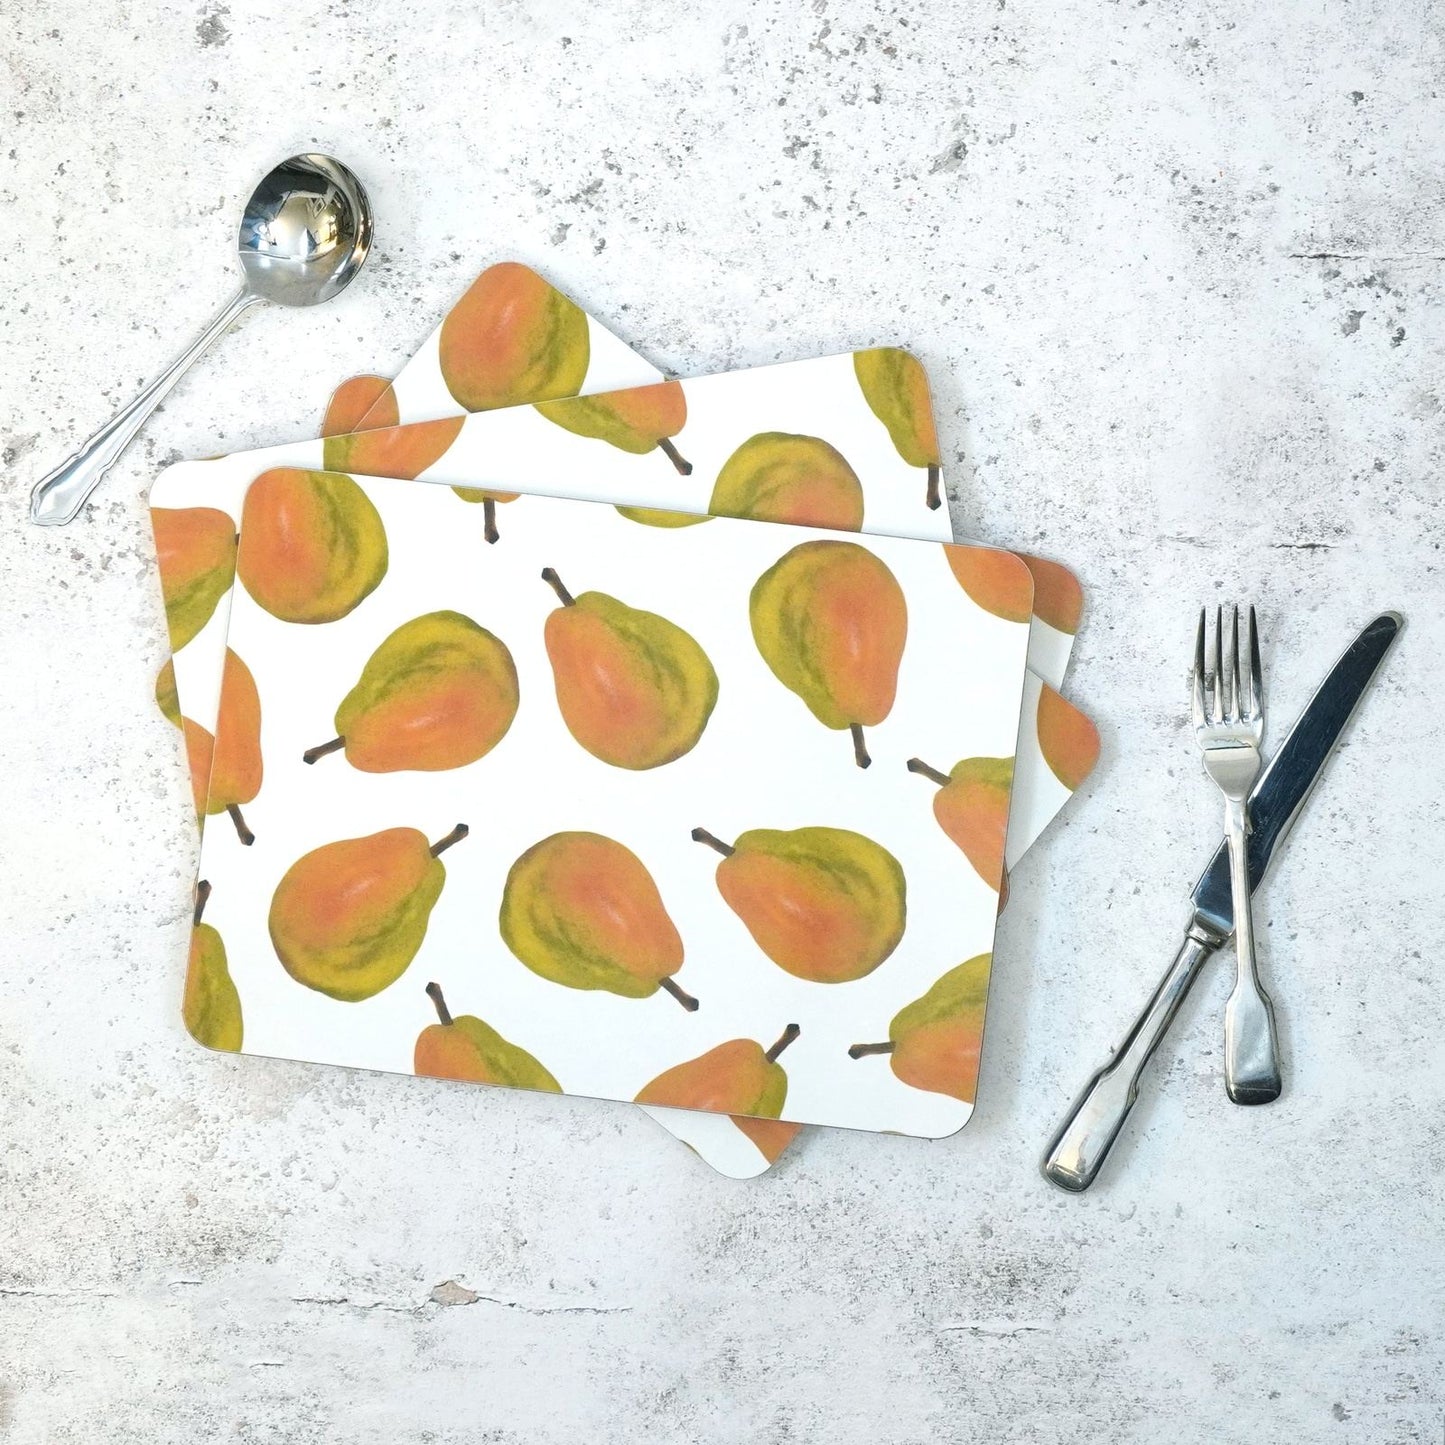 Pear placemats made from wood